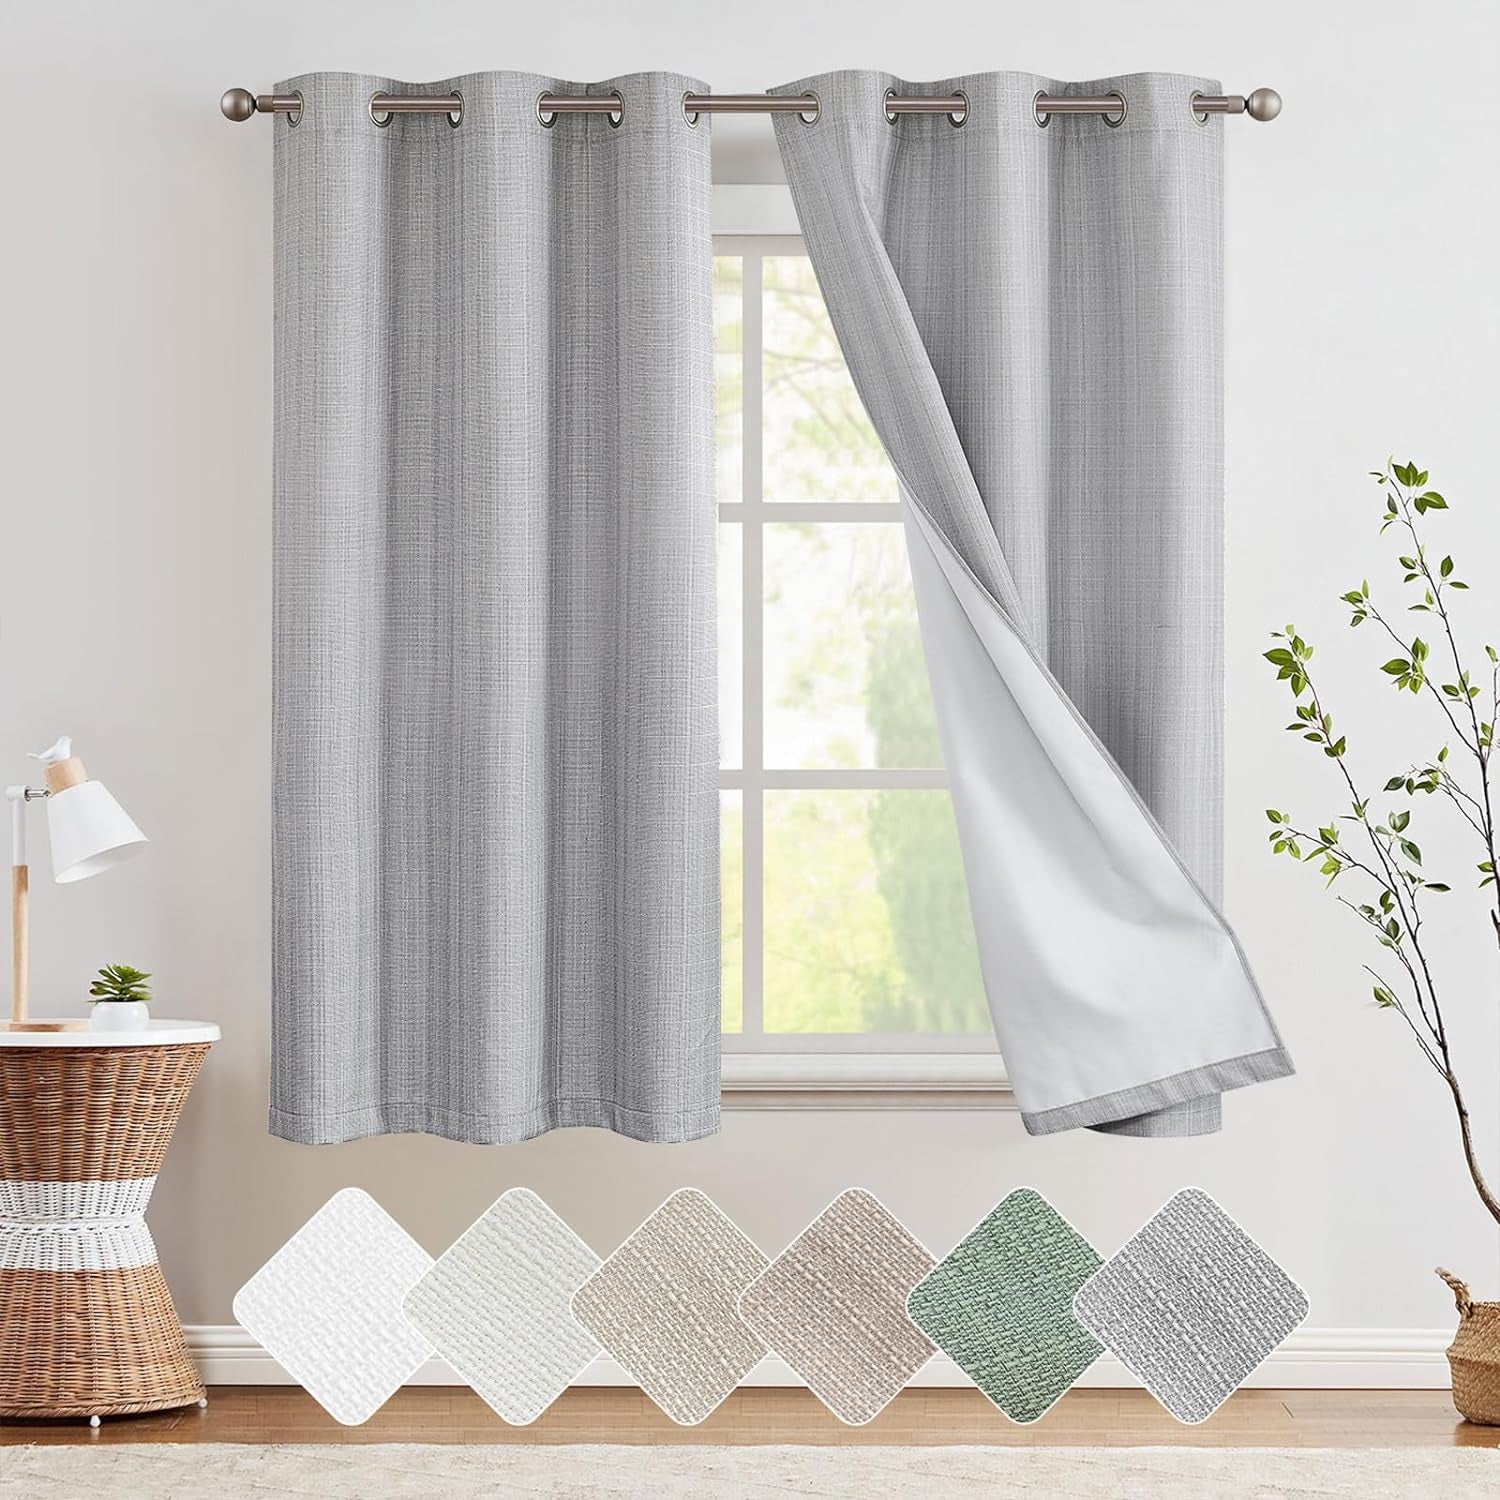 Jinchan 100% Blackout Curtains for Bedroom Living Room Linen Blackout Curtains 84 Inch Long Room Darkening Curtains Linen Textured Drapes 2 Panels Window Curtains Grommet Top Heathered Beige  CKNY HOME FASHION   